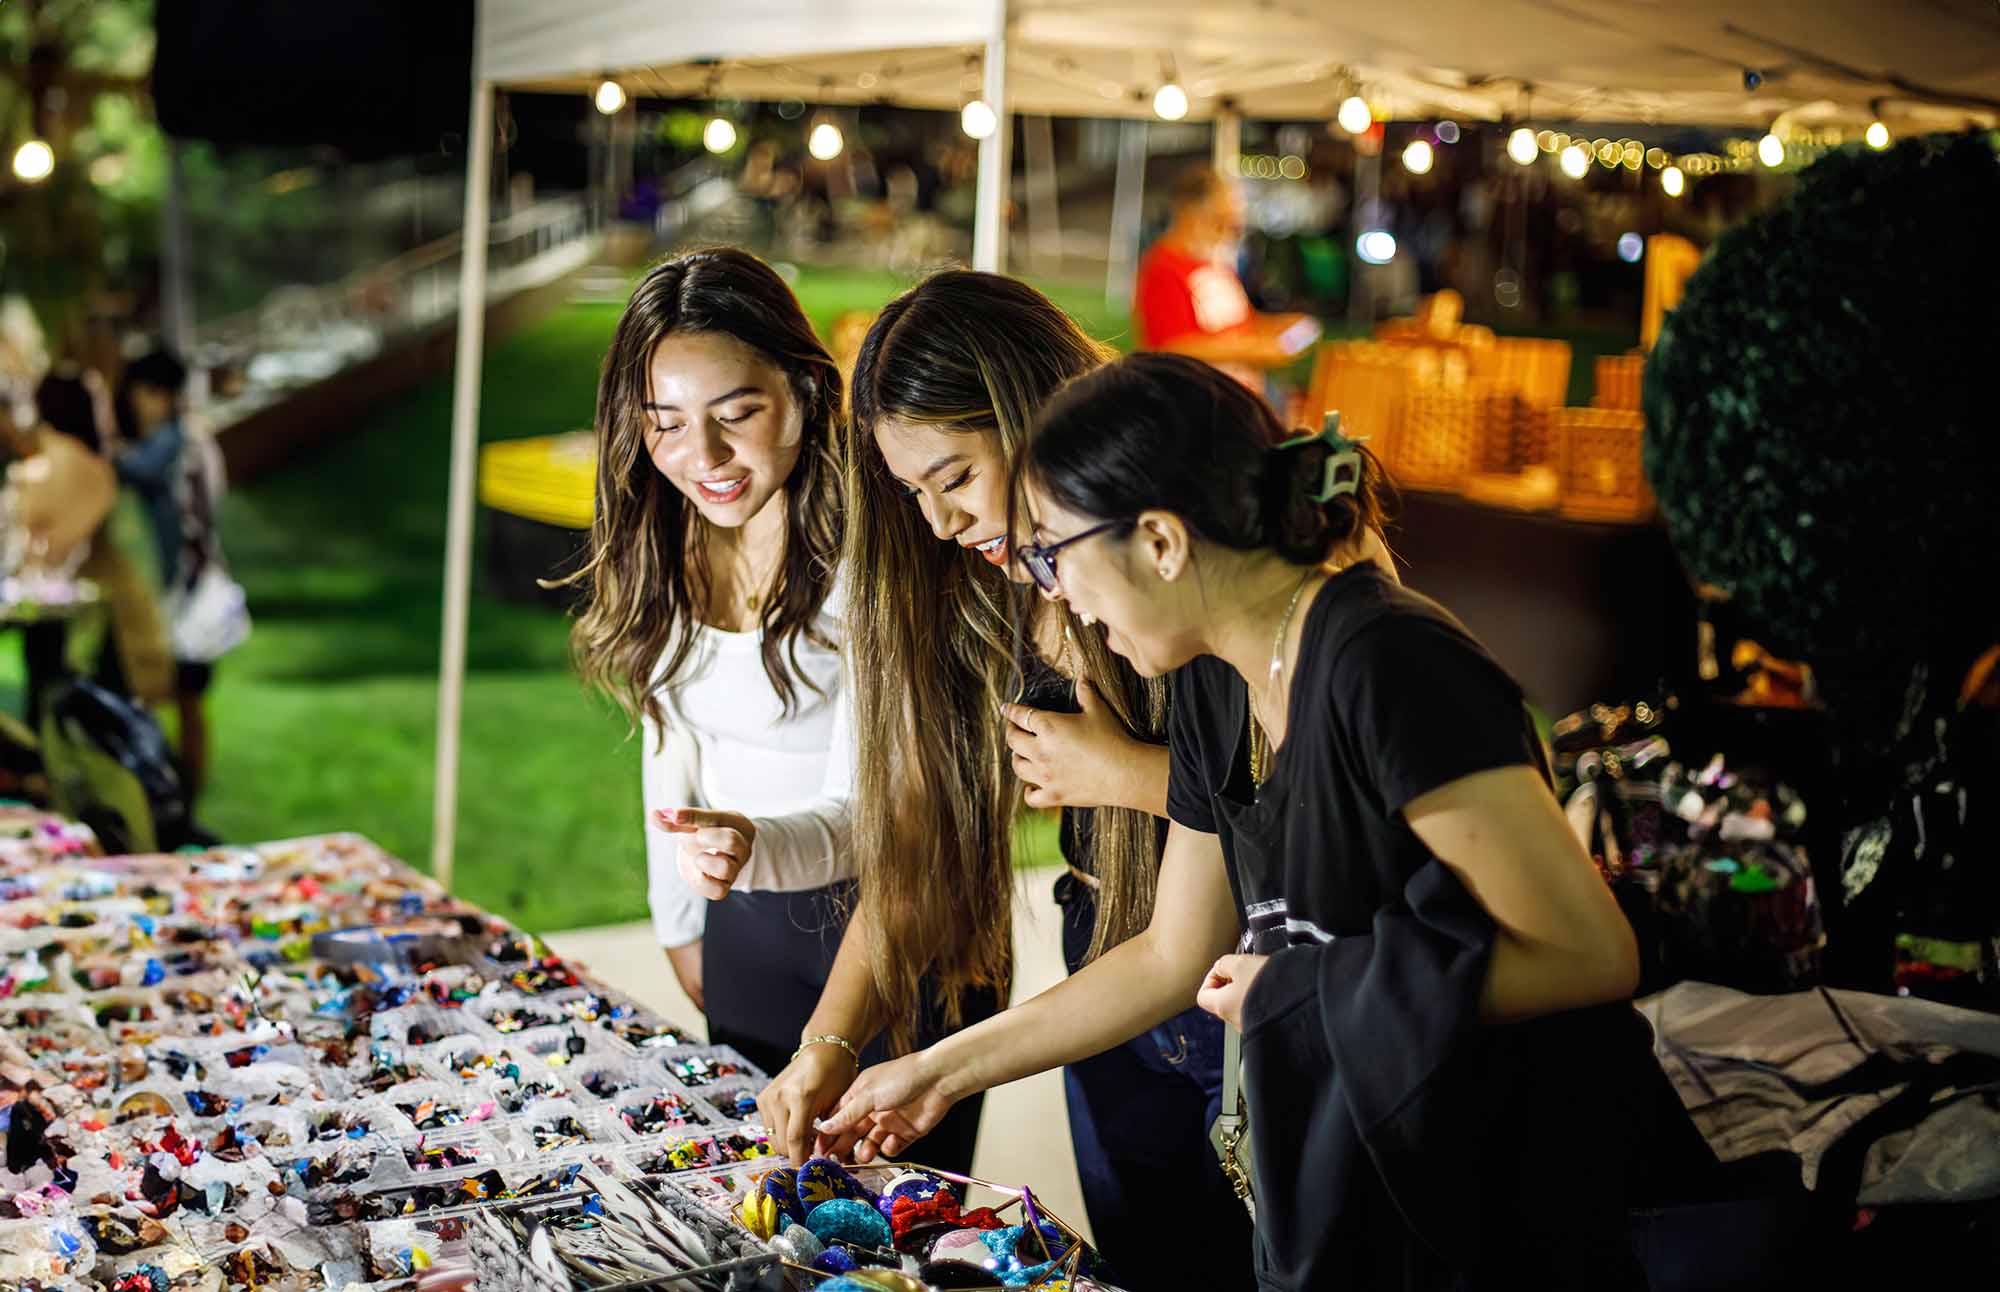 Three people looking at merchandise on a table at an outdoor night market